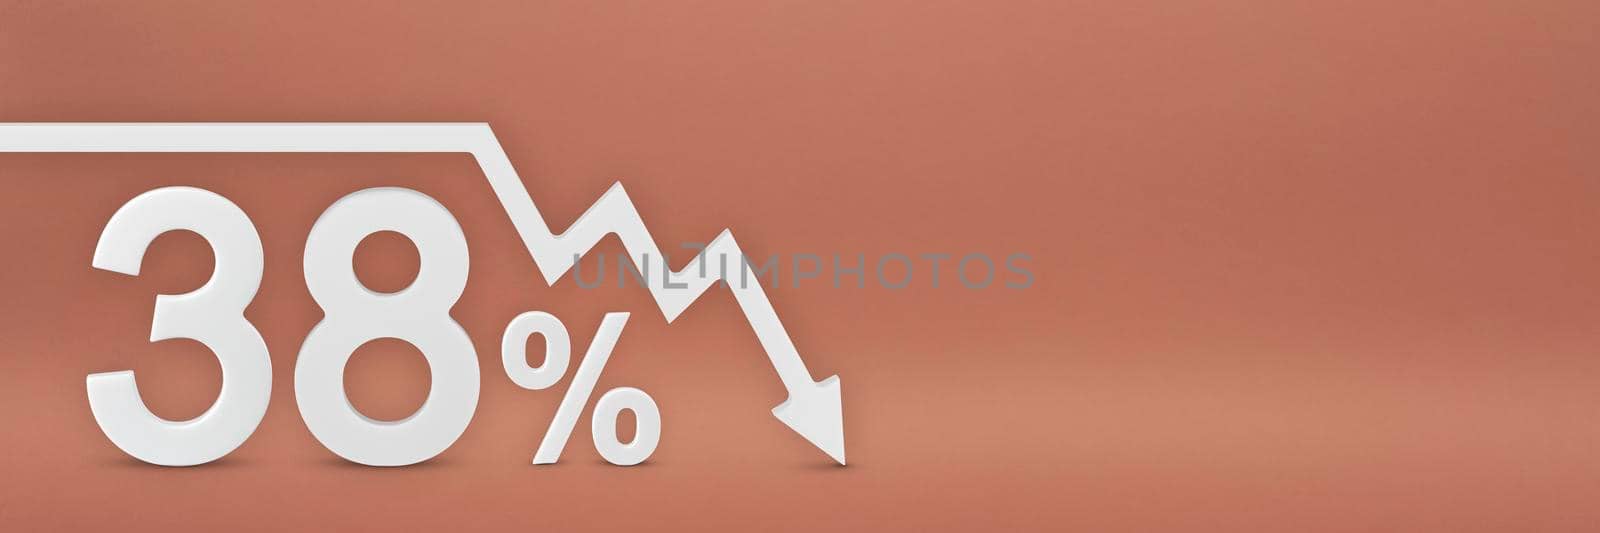 thirty-eight percent, the arrow on the graph is pointing down. Stock market crash, bear market, inflation.Economic collapse, collapse of stocks.3d banner,38 percent discount sign on a red background. by SERSOL